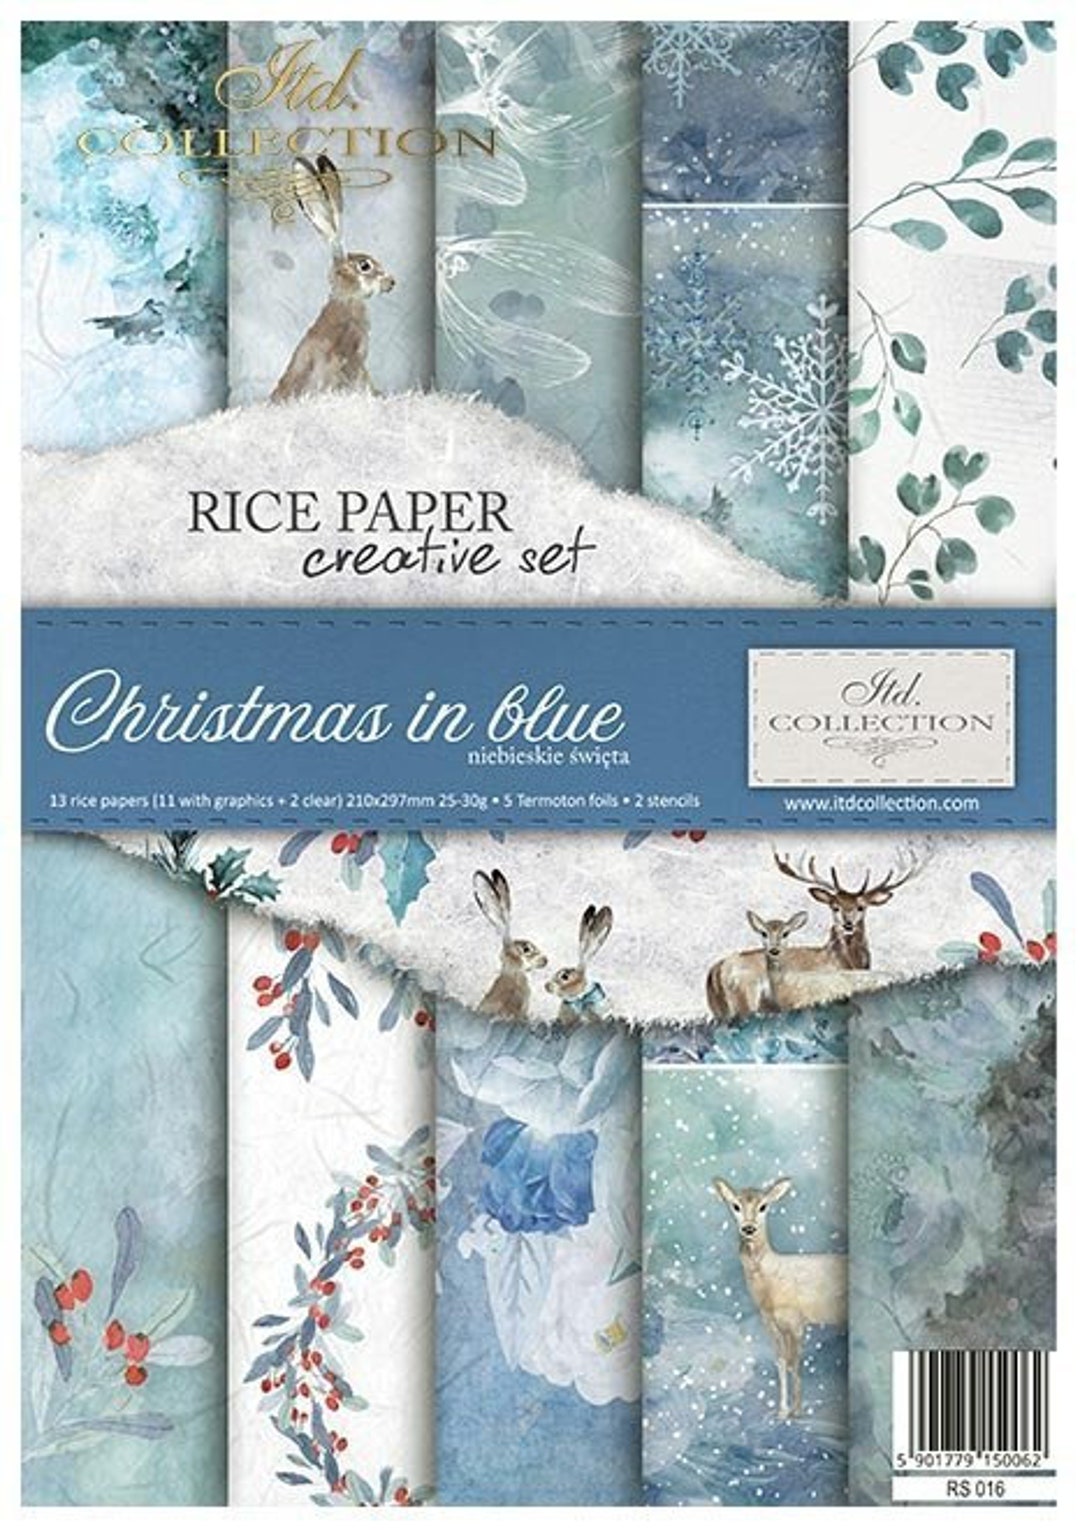 rice paper creative set RP024 - Christmas Time* winter backgrounds, views,  snowy buildings, children's Christmas decorations, snowflakes, snowflakes